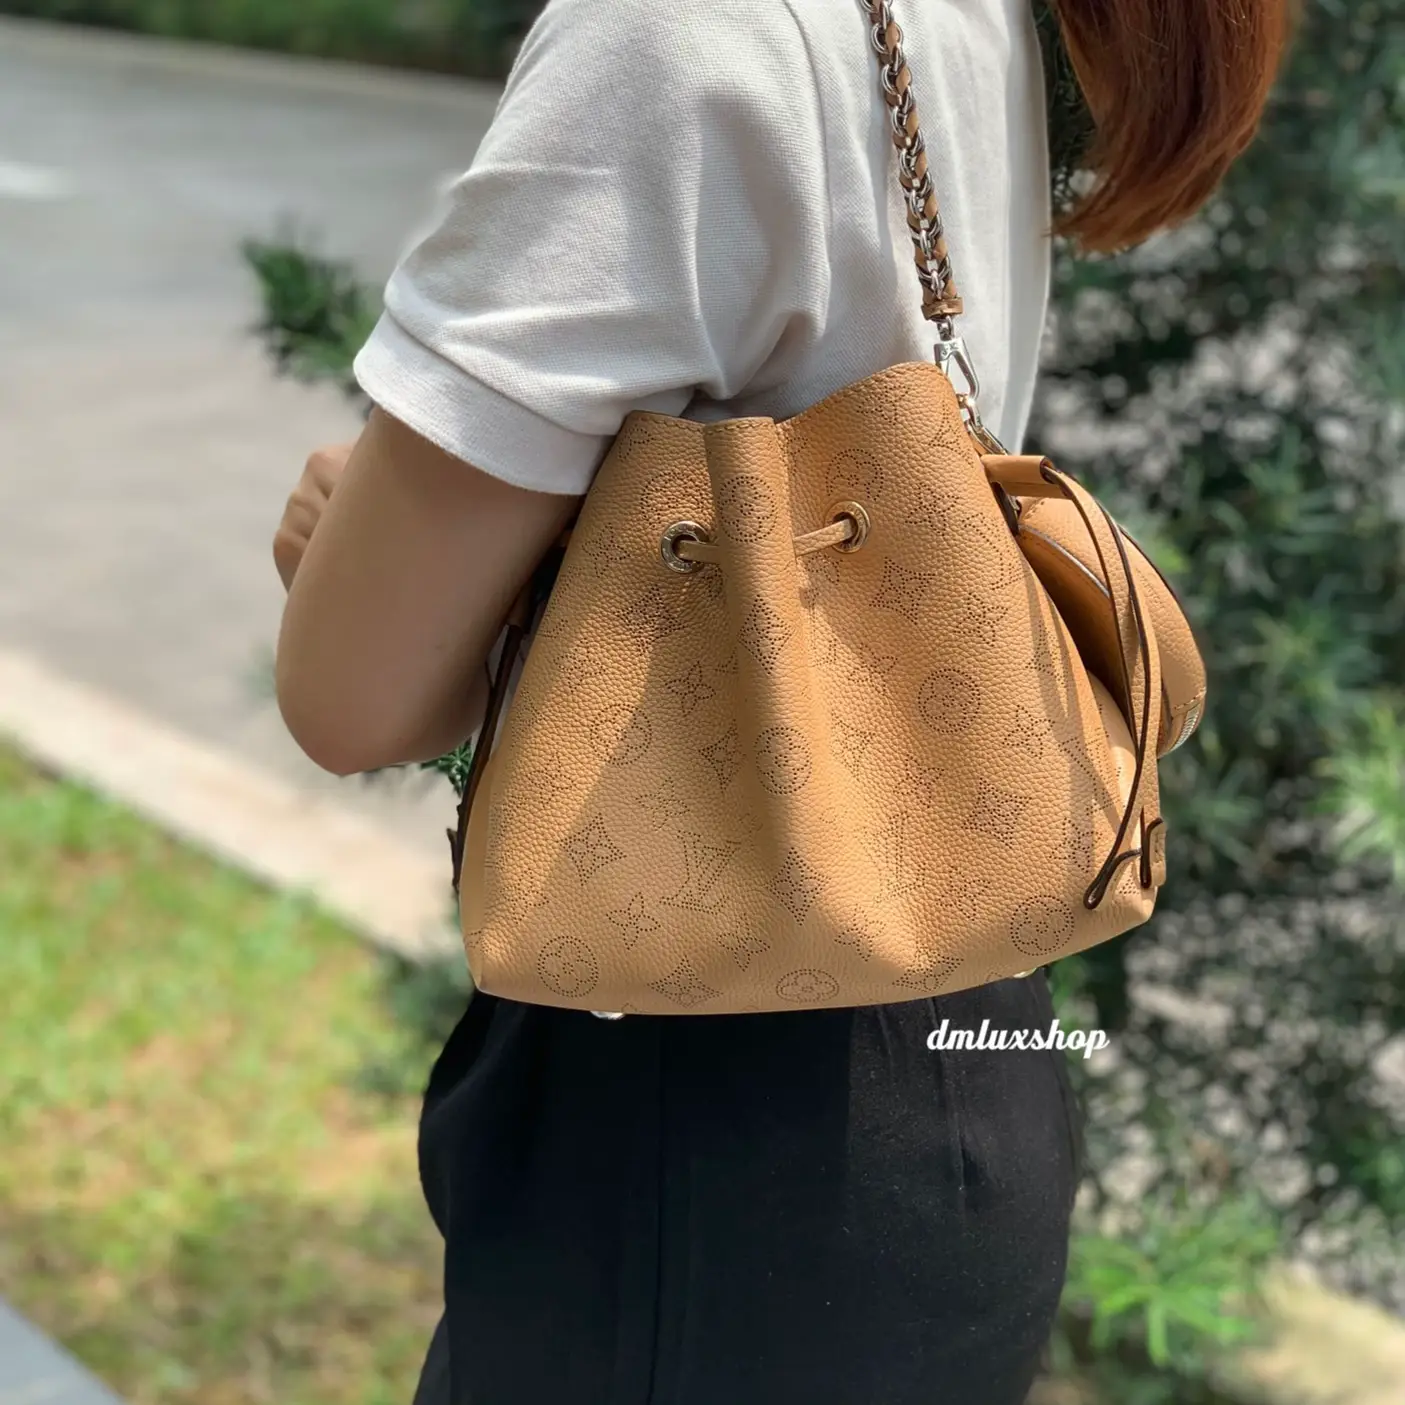 🇲🇾Louis Vuitton Bella❤️‍🔥, Gallery posted by DM Luxshop